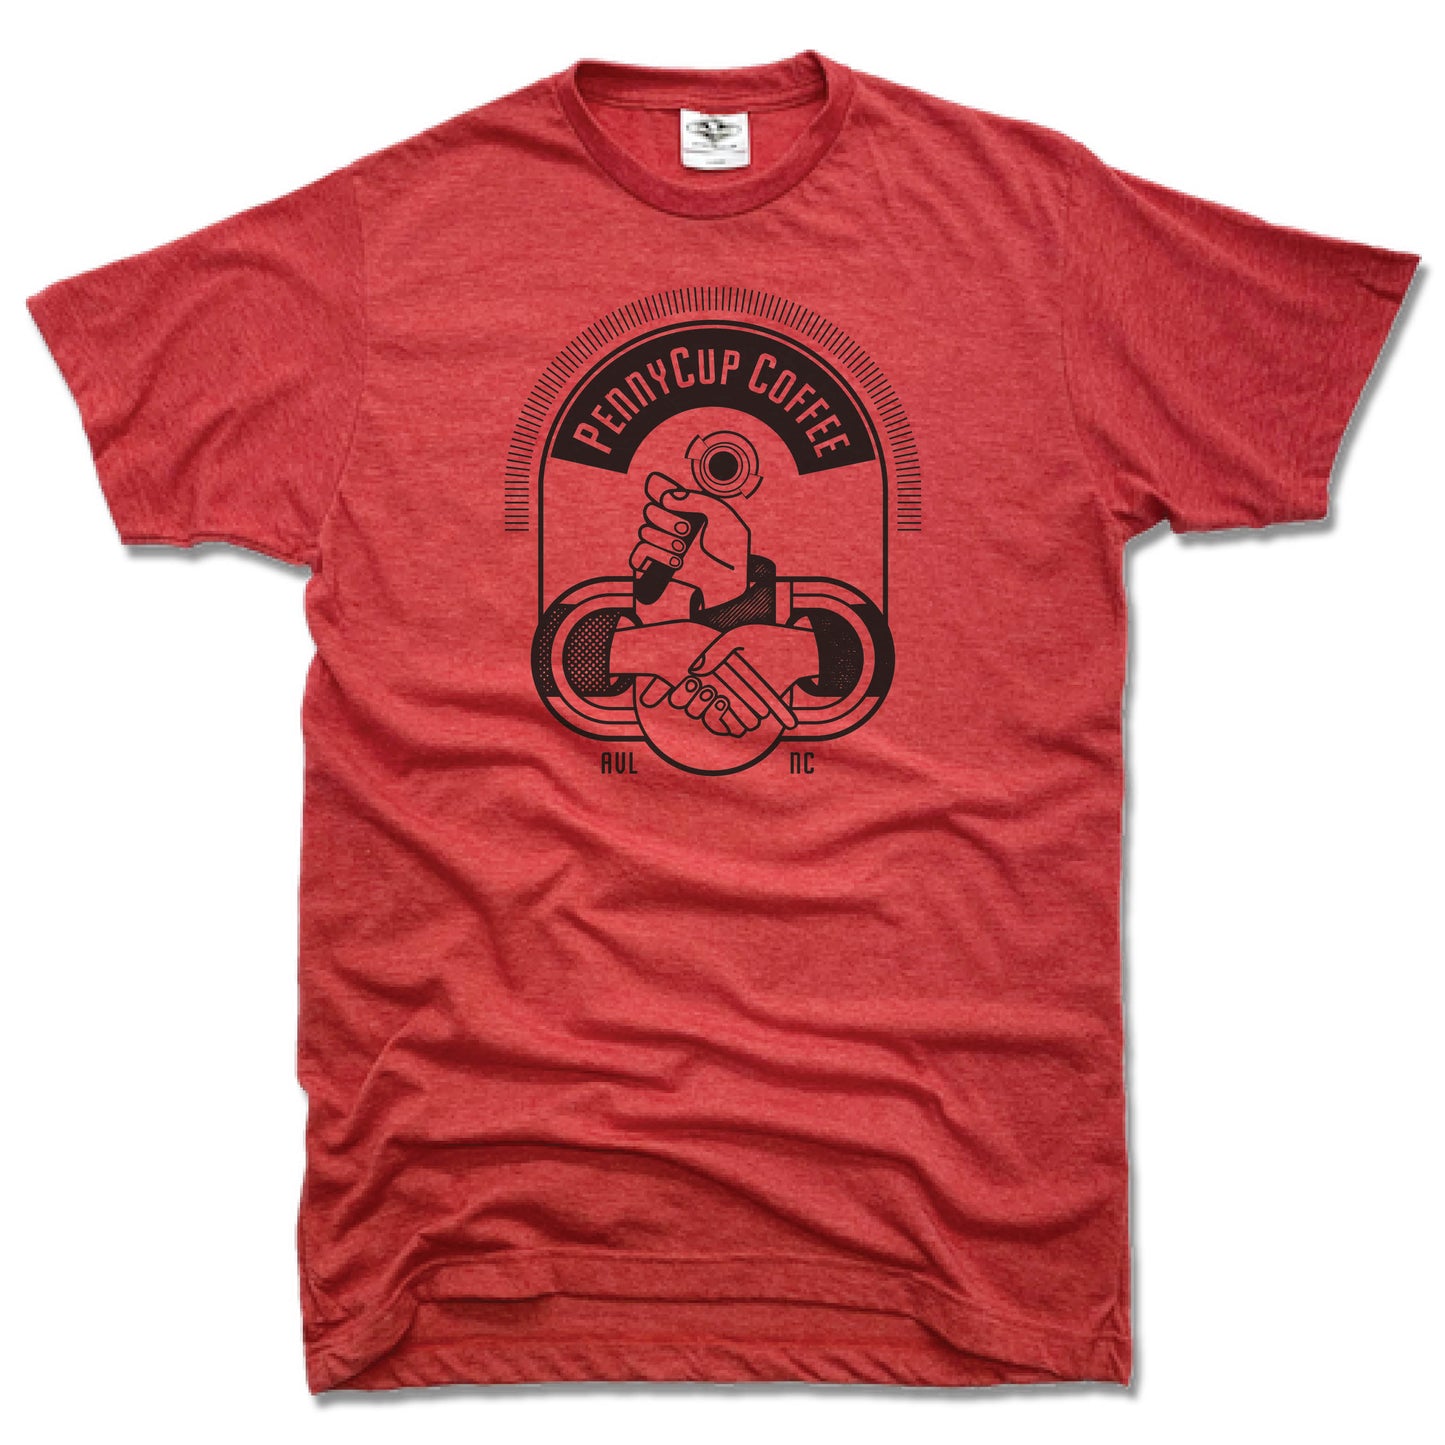 PENNYCUP COFFEE CO | UNISEX RED TEE | LOGO